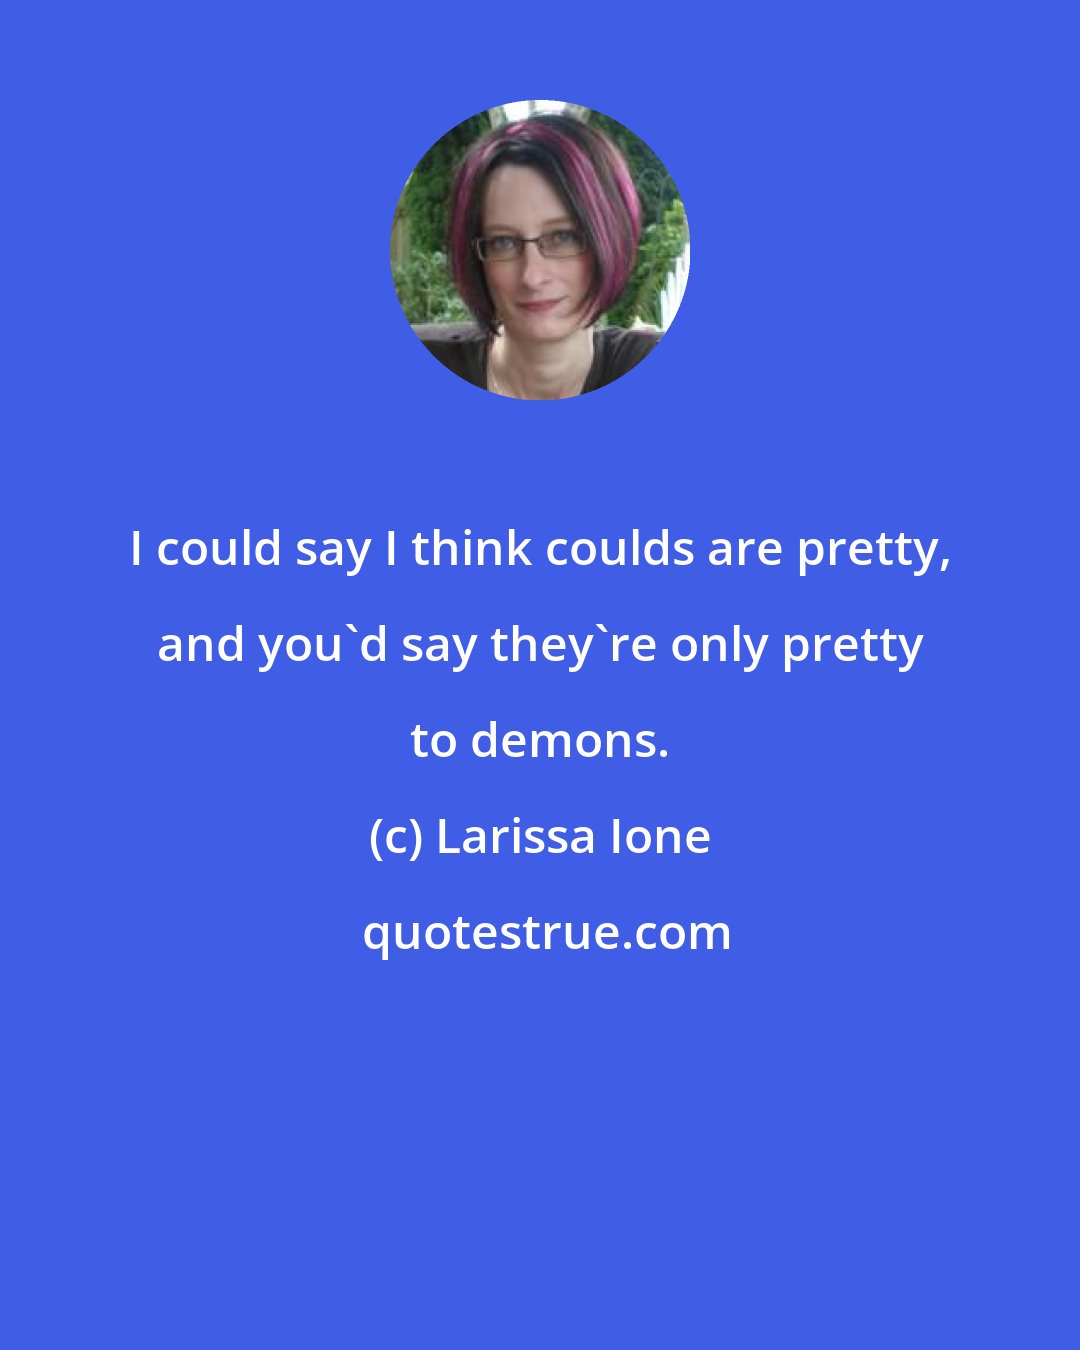 Larissa Ione: I could say I think coulds are pretty, and you'd say they're only pretty to demons.